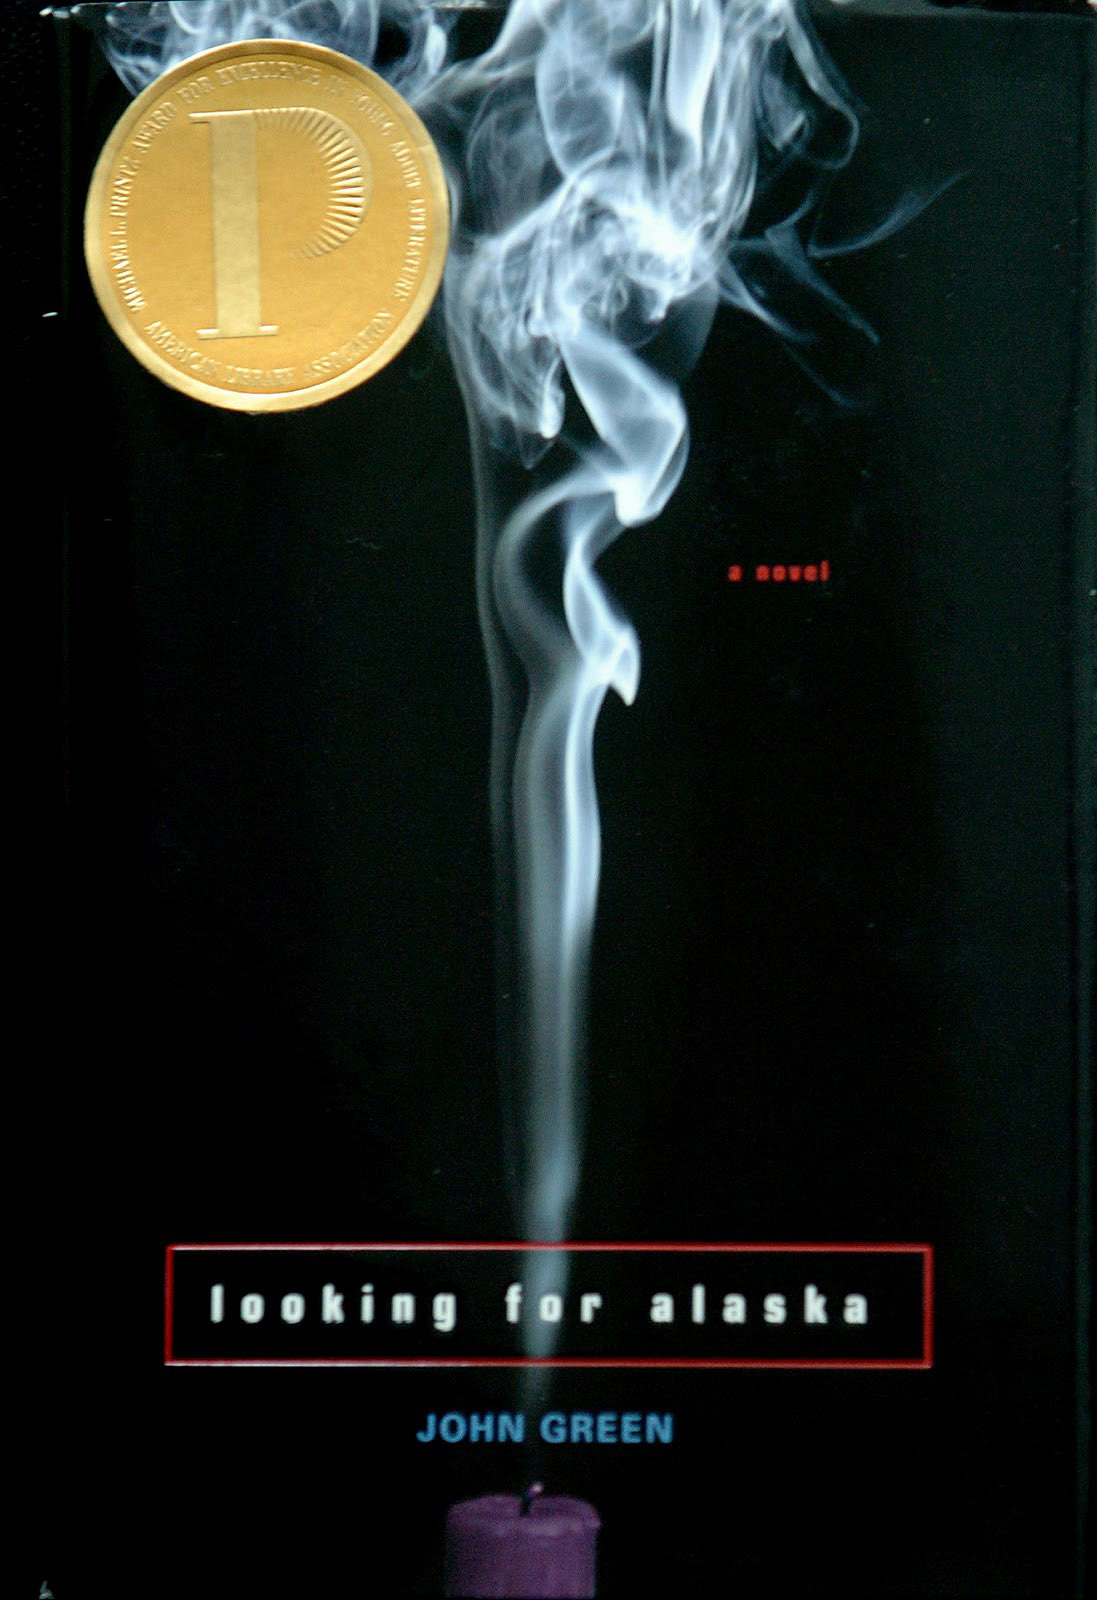 looking for alaska by john green book review